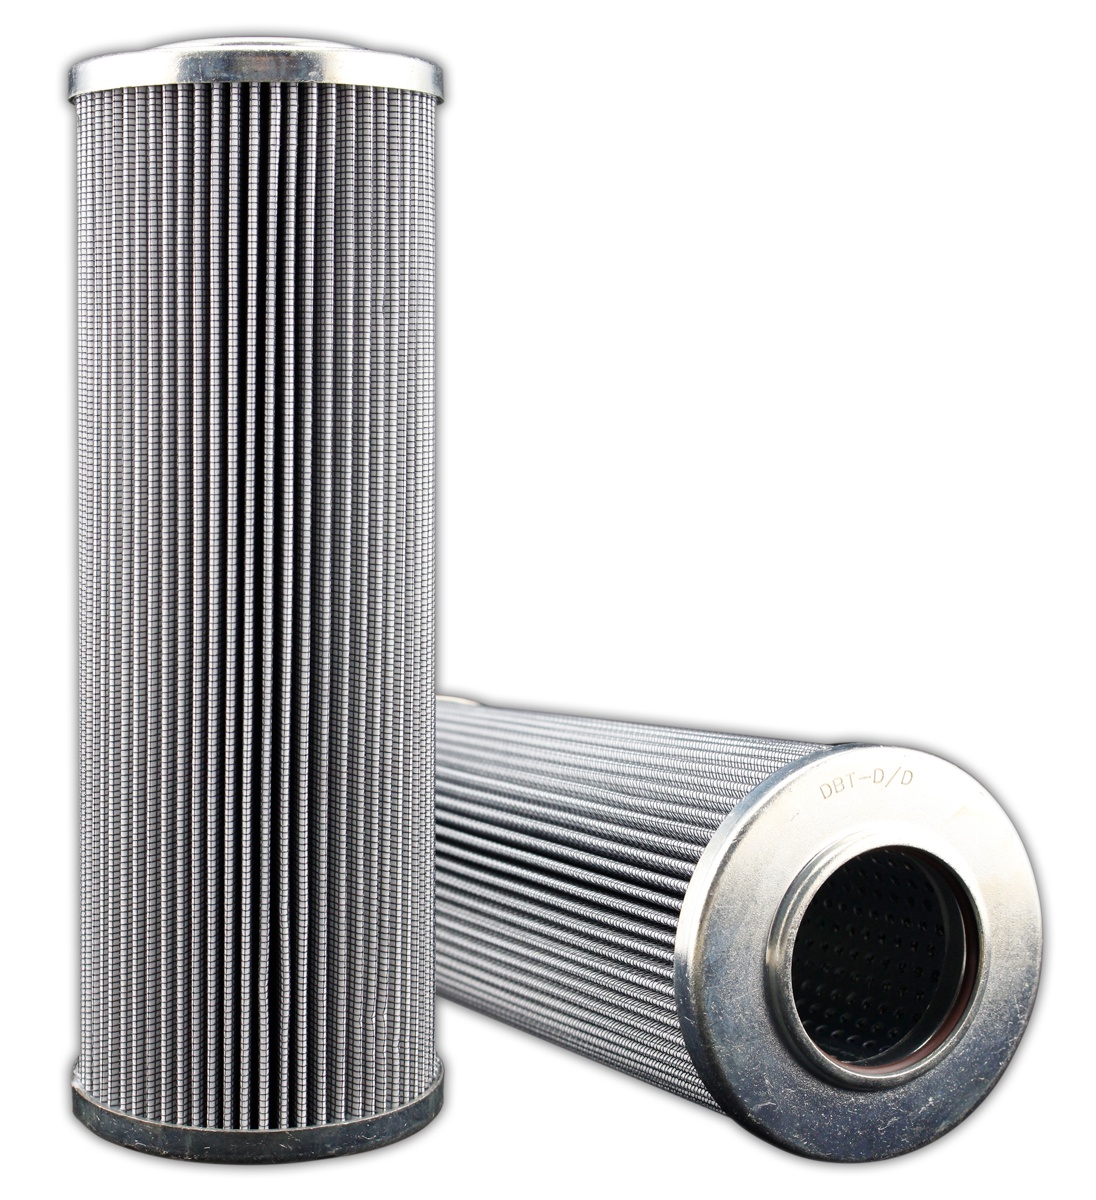 Interchange Hydraulic Filter, Glass, 25 Micron Rating, Viton Seal, 9.96 Inch Height